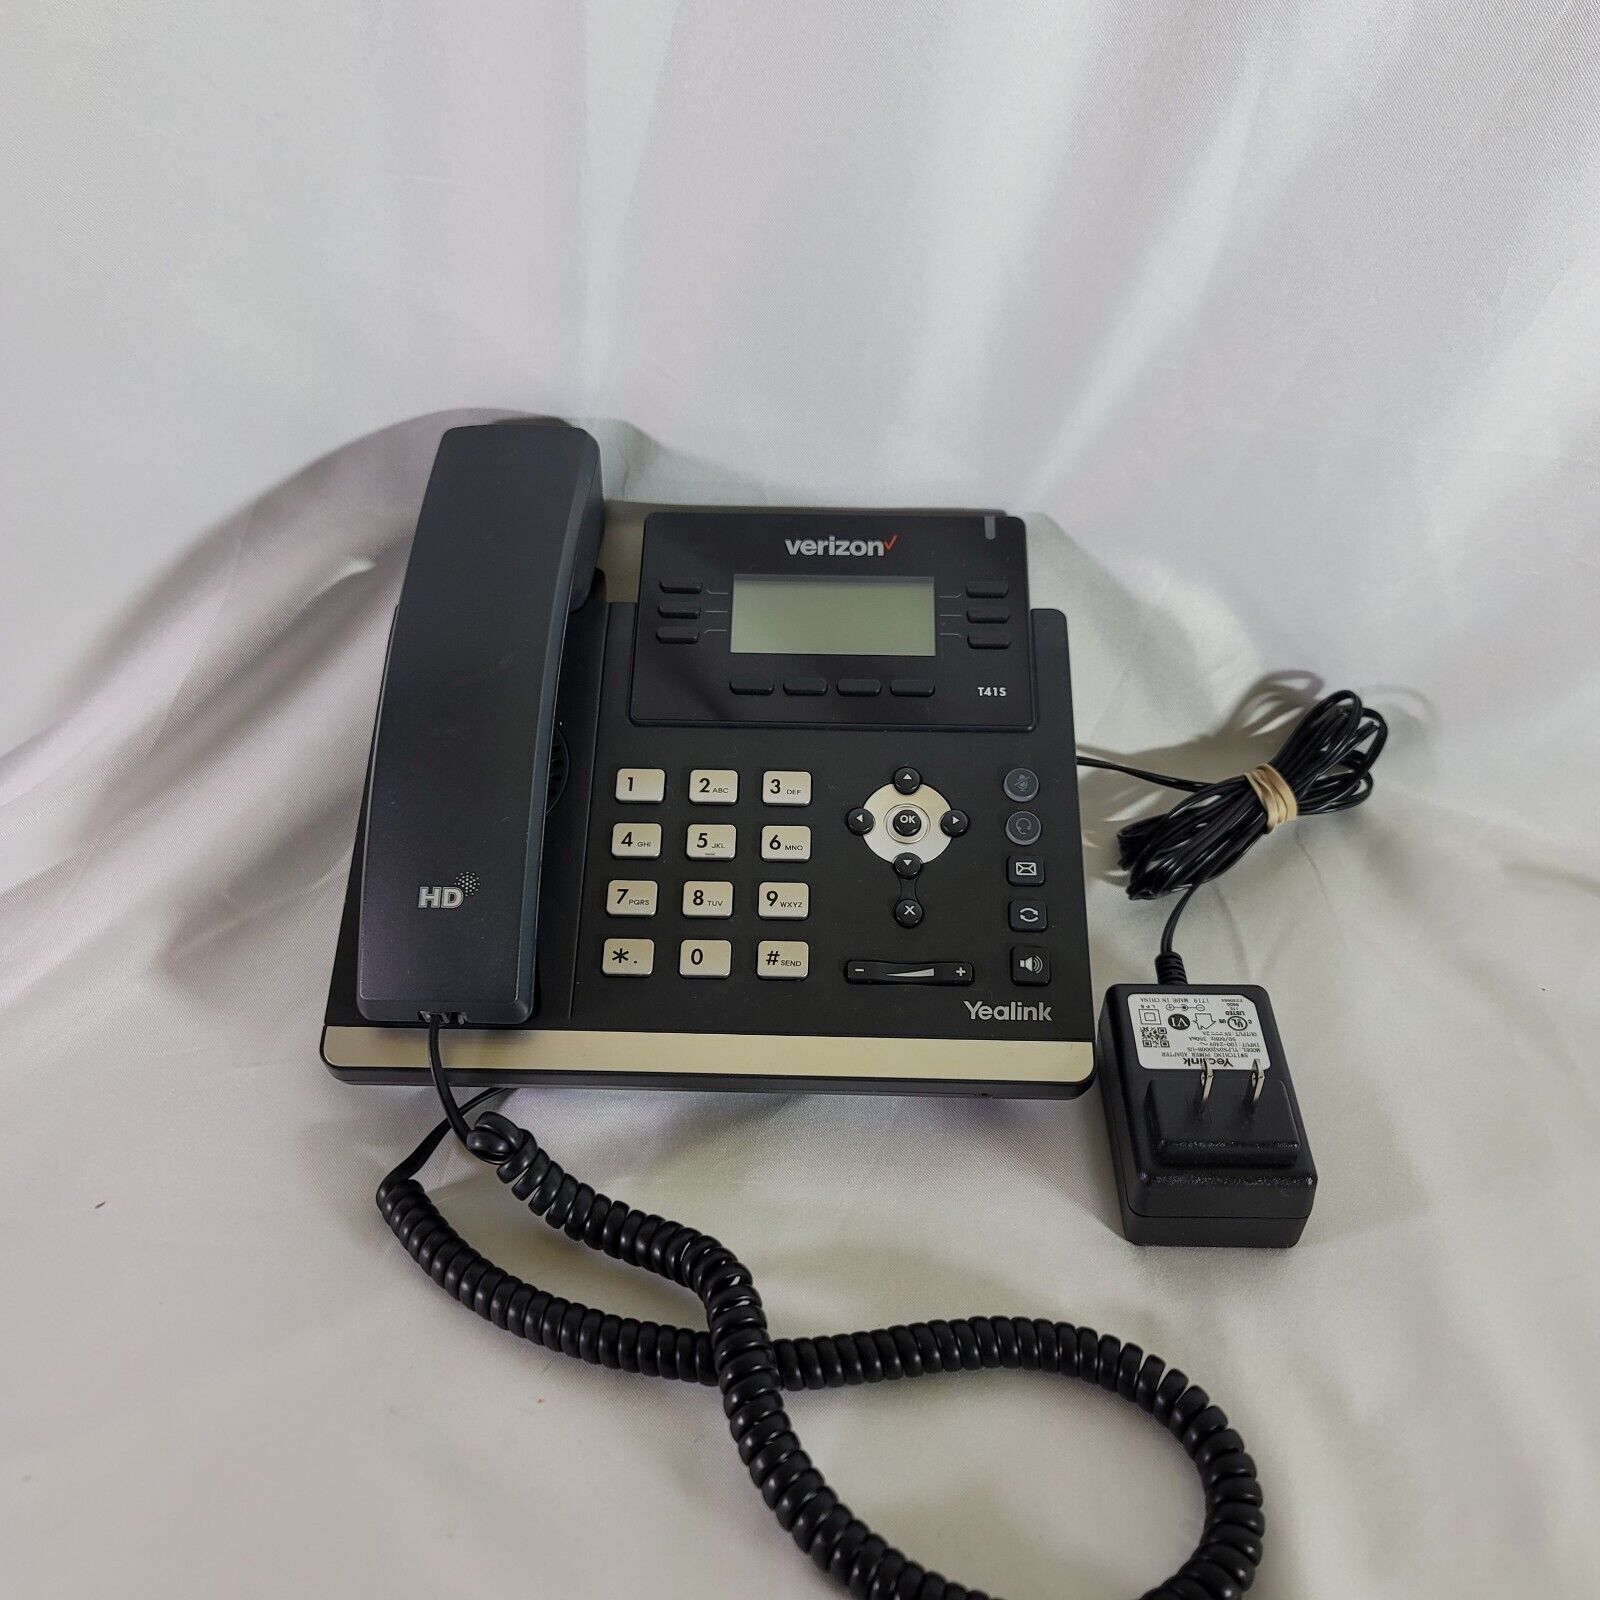 Yealink SIP-T41S IP Phone - Black - Phone Only, With Power Cord